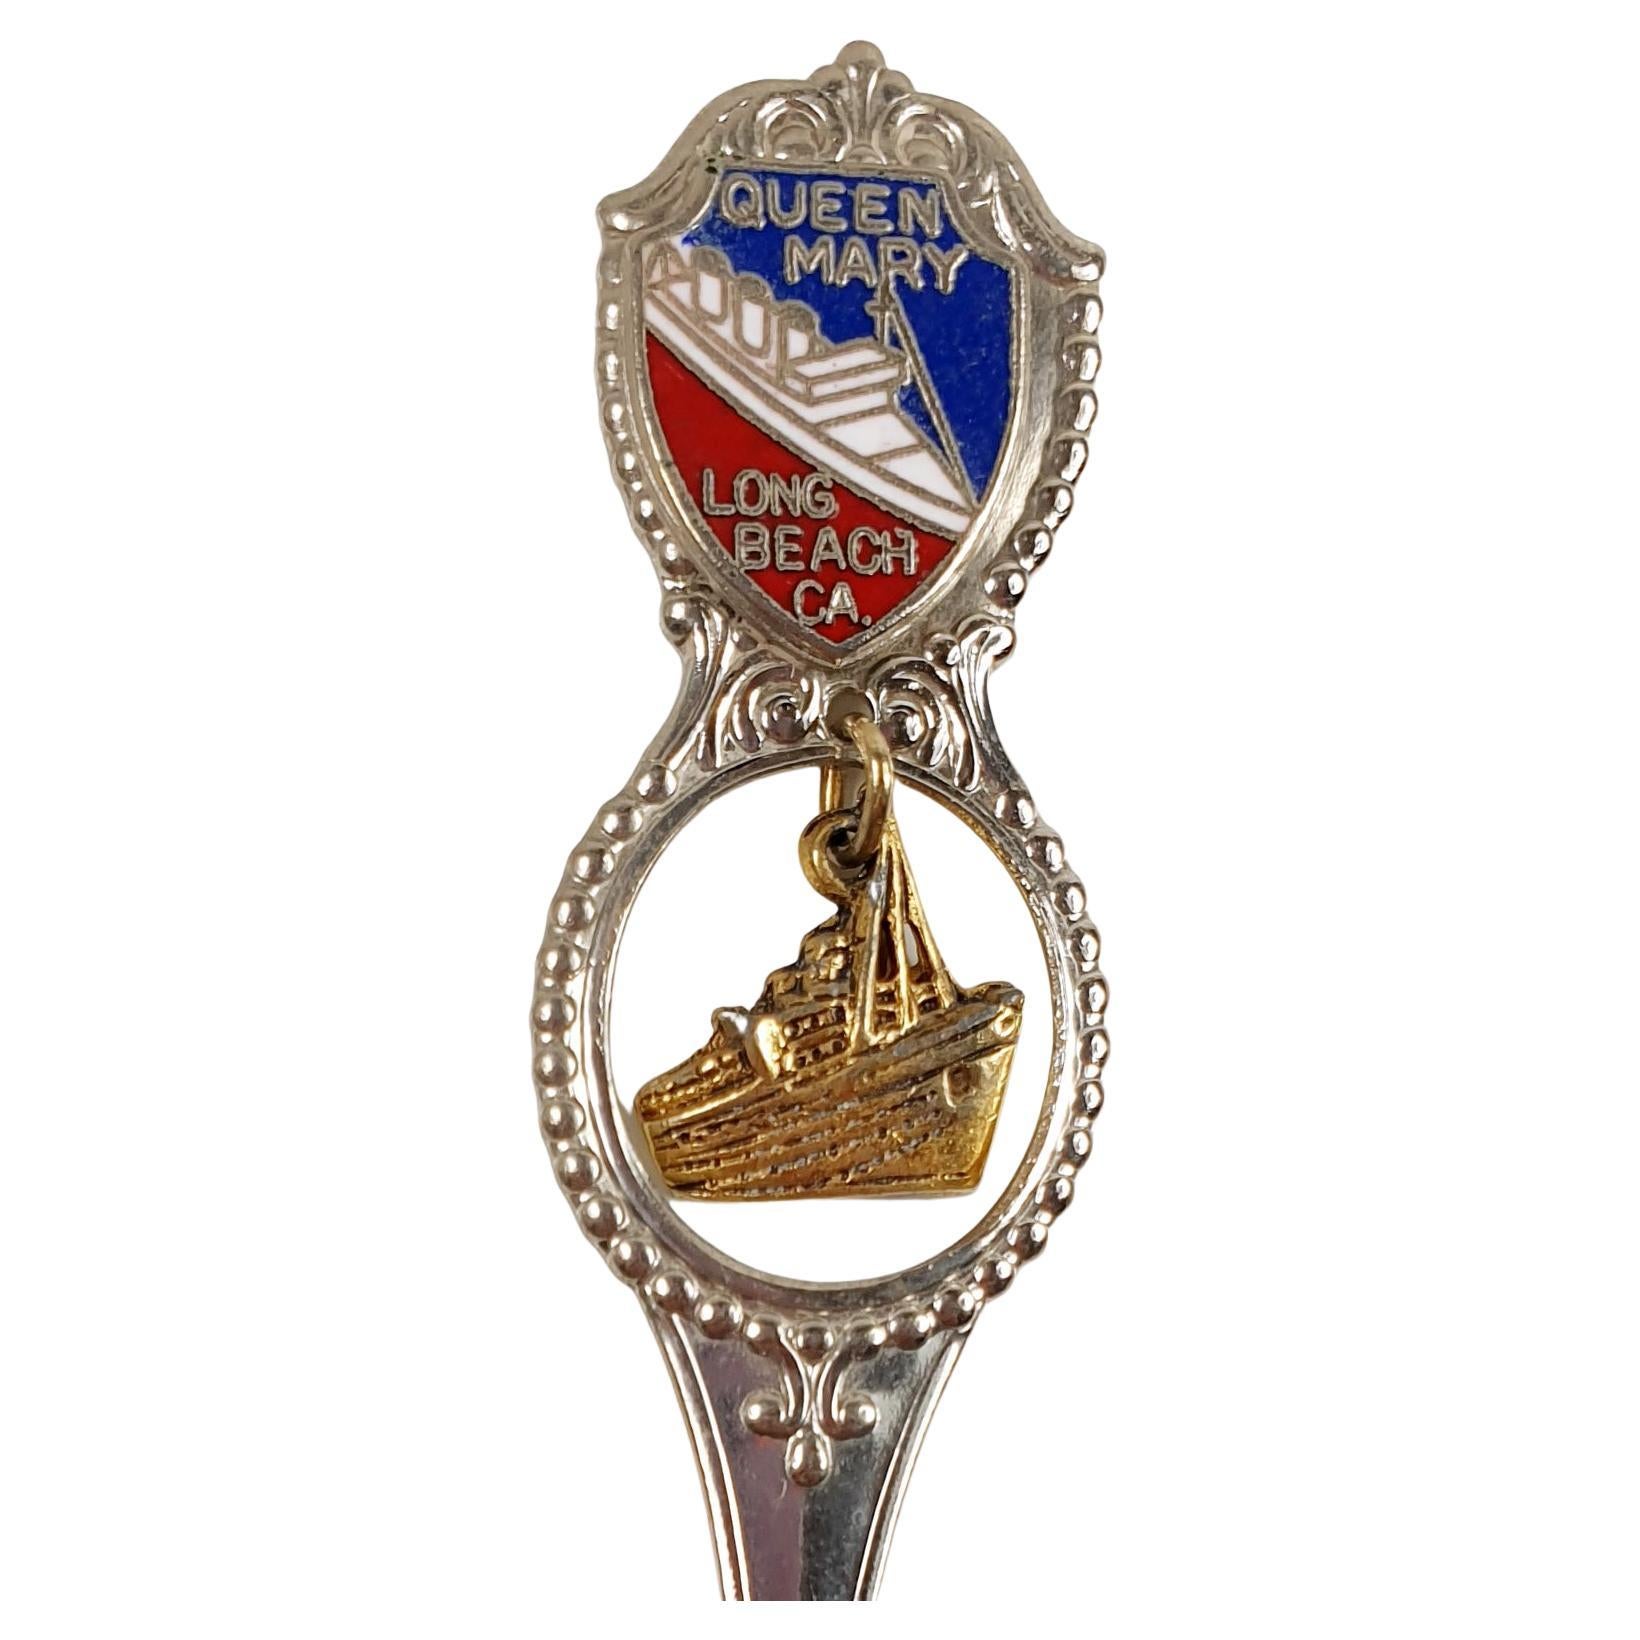 Queen Mary Collection Silver Teaspoon with Figurine
Length 4.68in / 11.9cm
Width 0.86in / 2.2cm
Weight 8.1gr

PRADERA is a  second generation of a family run business jewelers of reference in Spain, with a large track record  being official